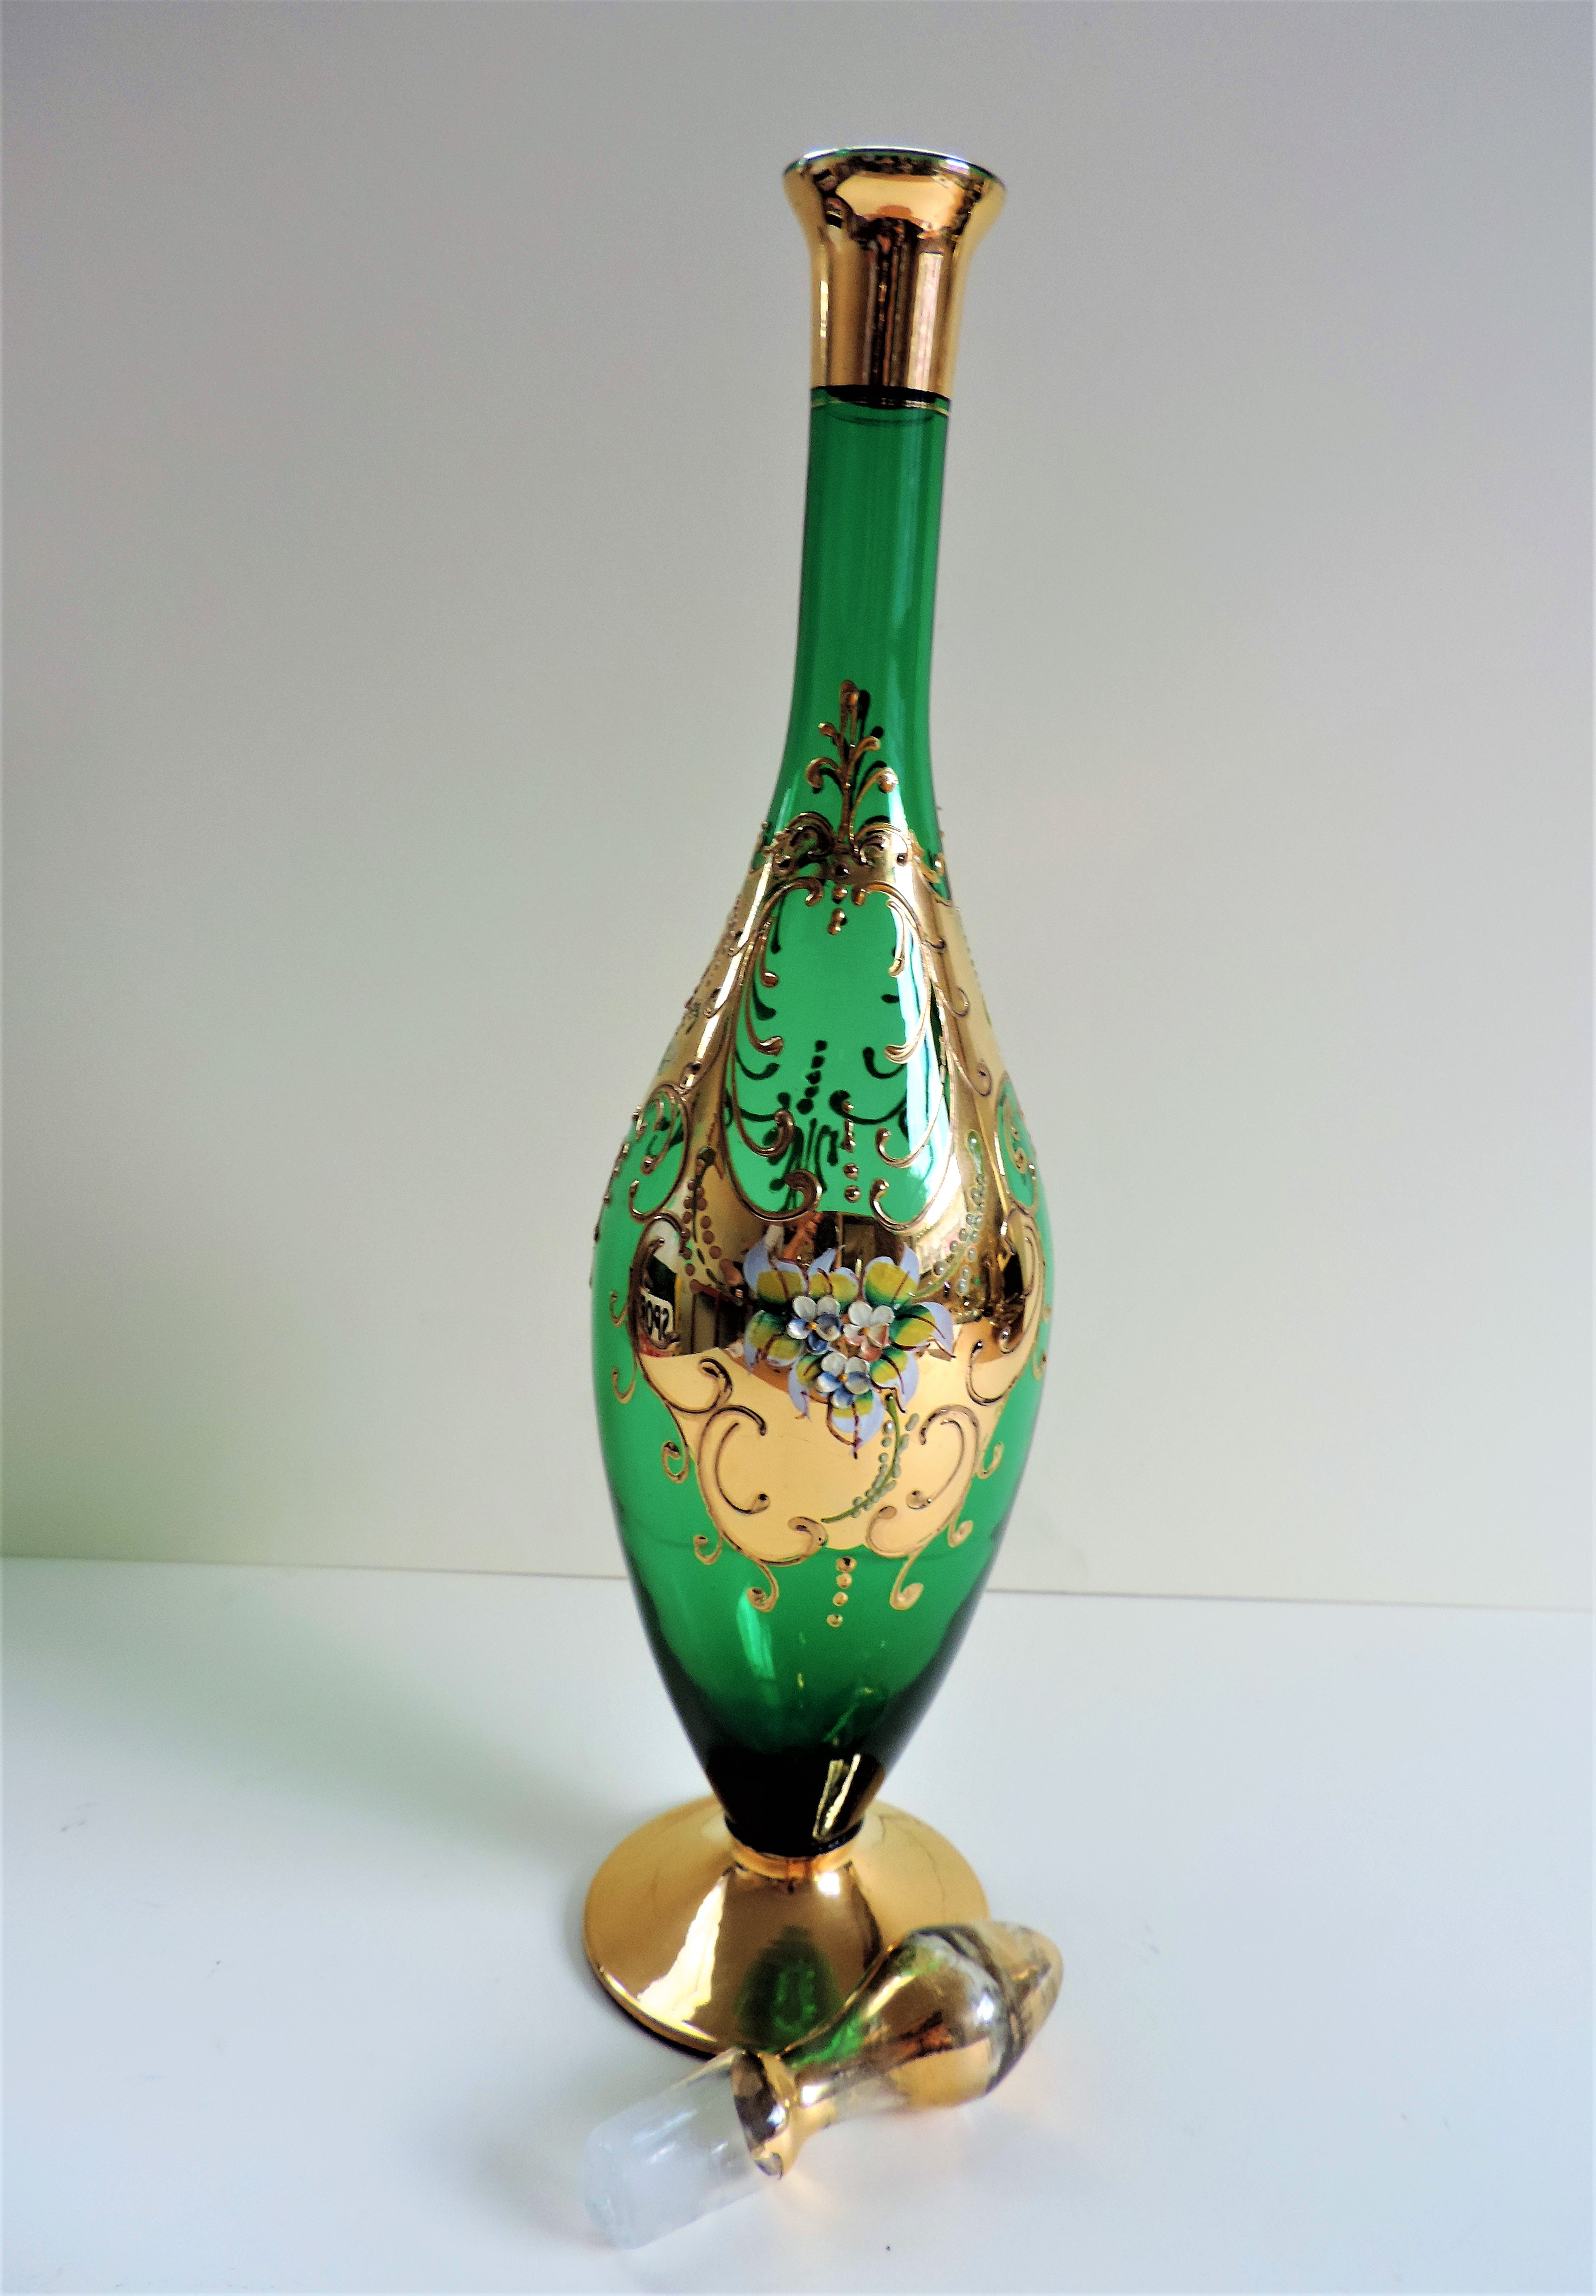 Vintage Murano Glass Decanter Large 44cm Tall - Image 2 of 3